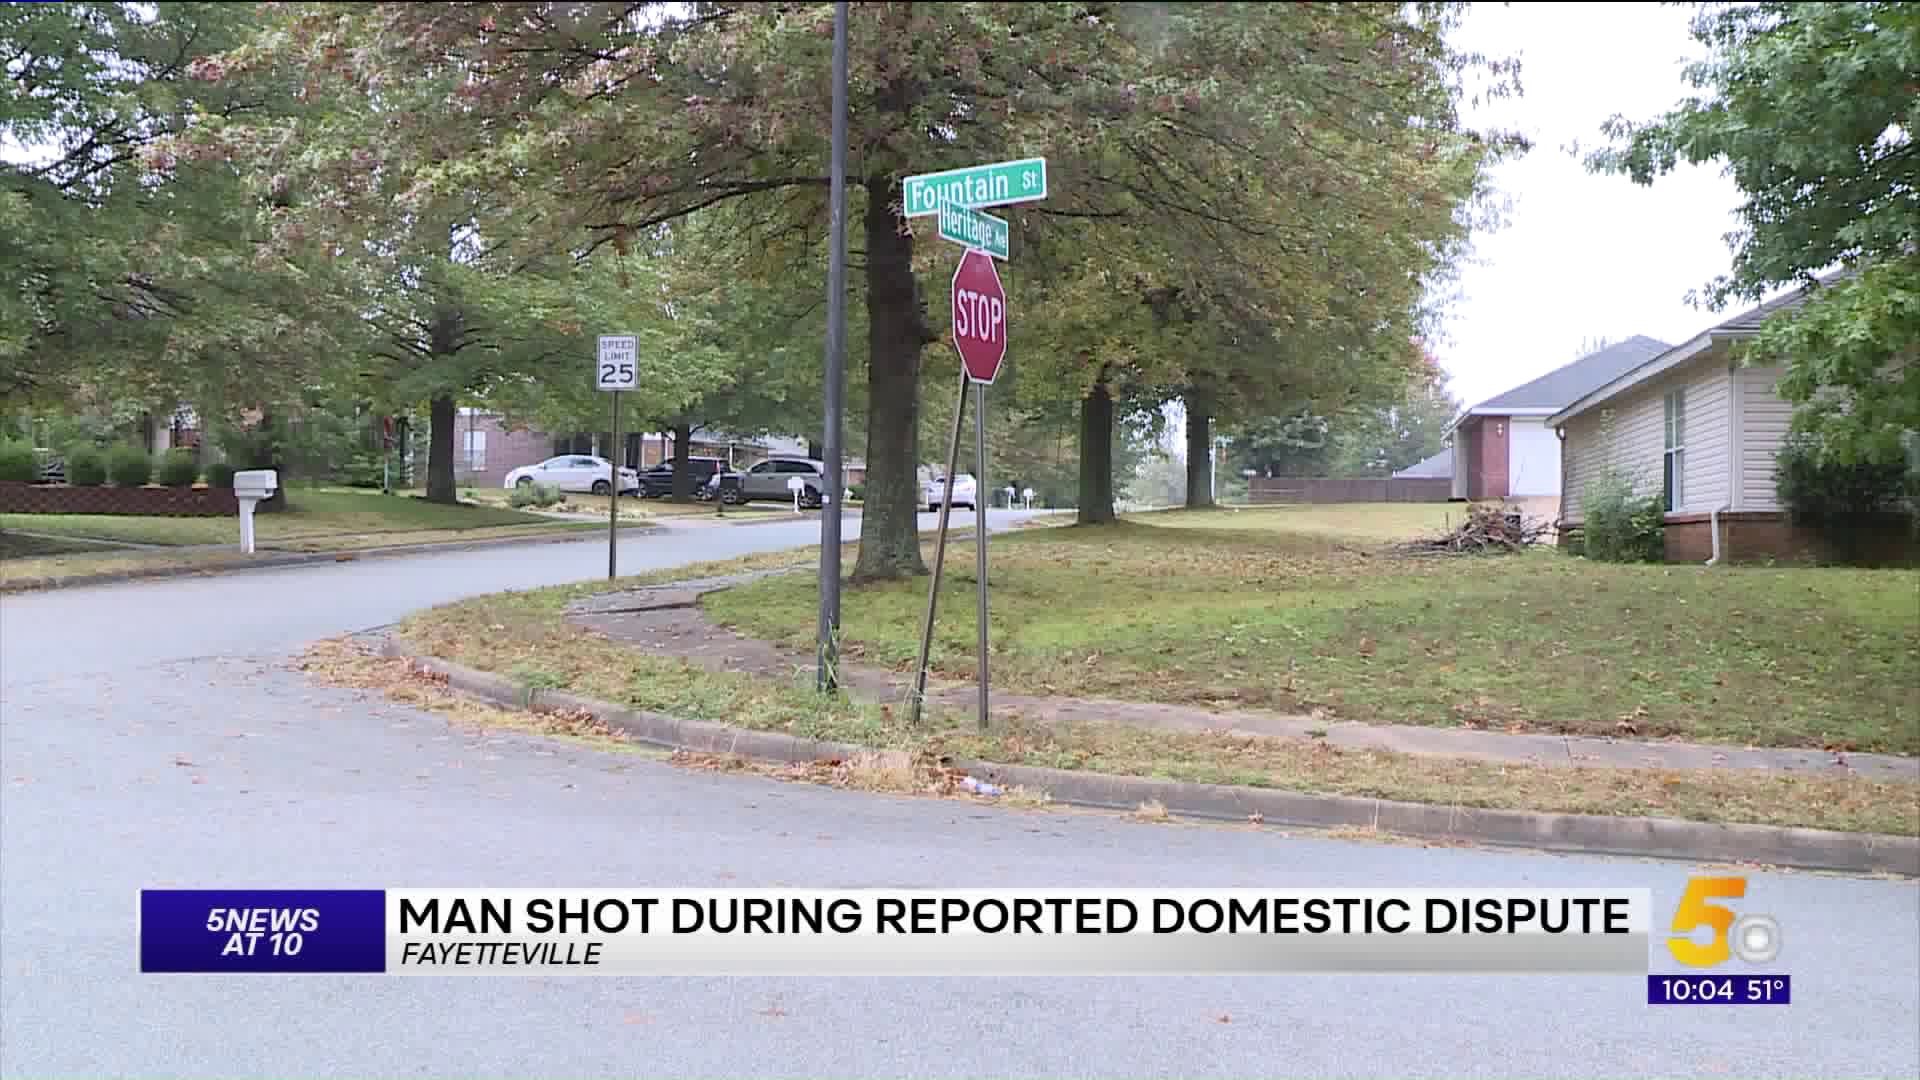 Police Find Man Shot After Responding To Domestic Disturbance Call